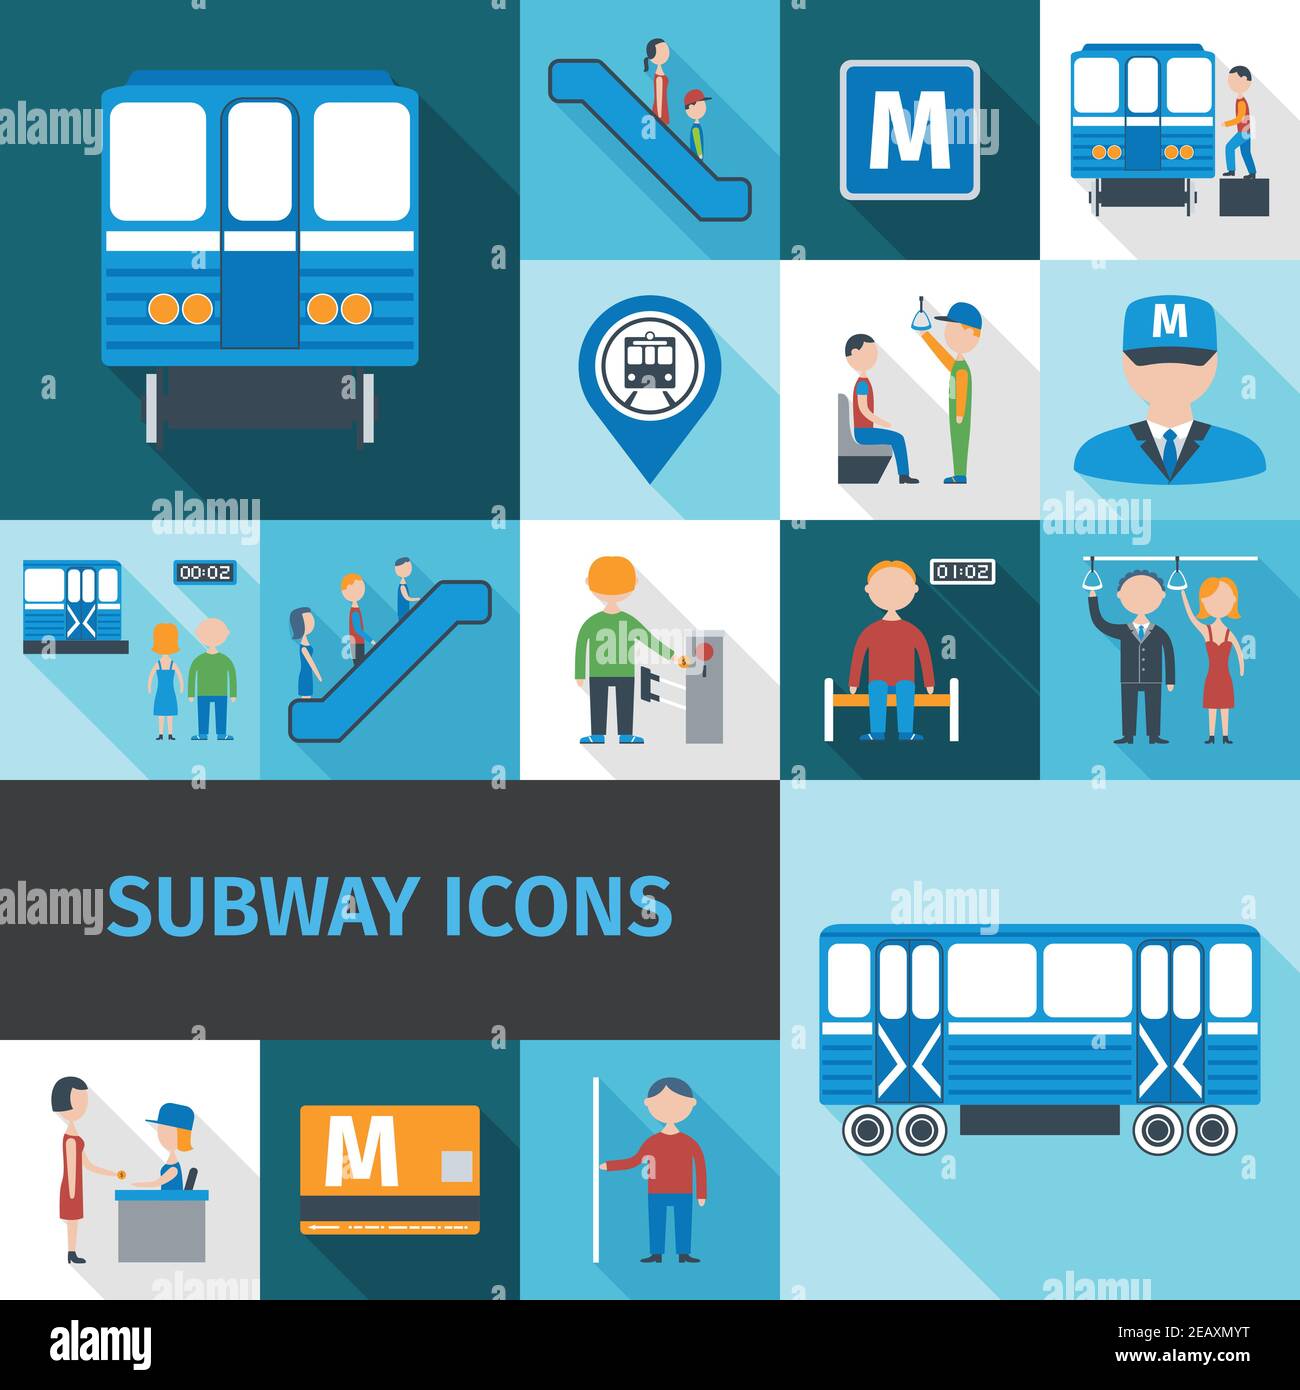 Subway decorative icons flat set with transport passengers employees and objects isolated vector illustration Stock Vector